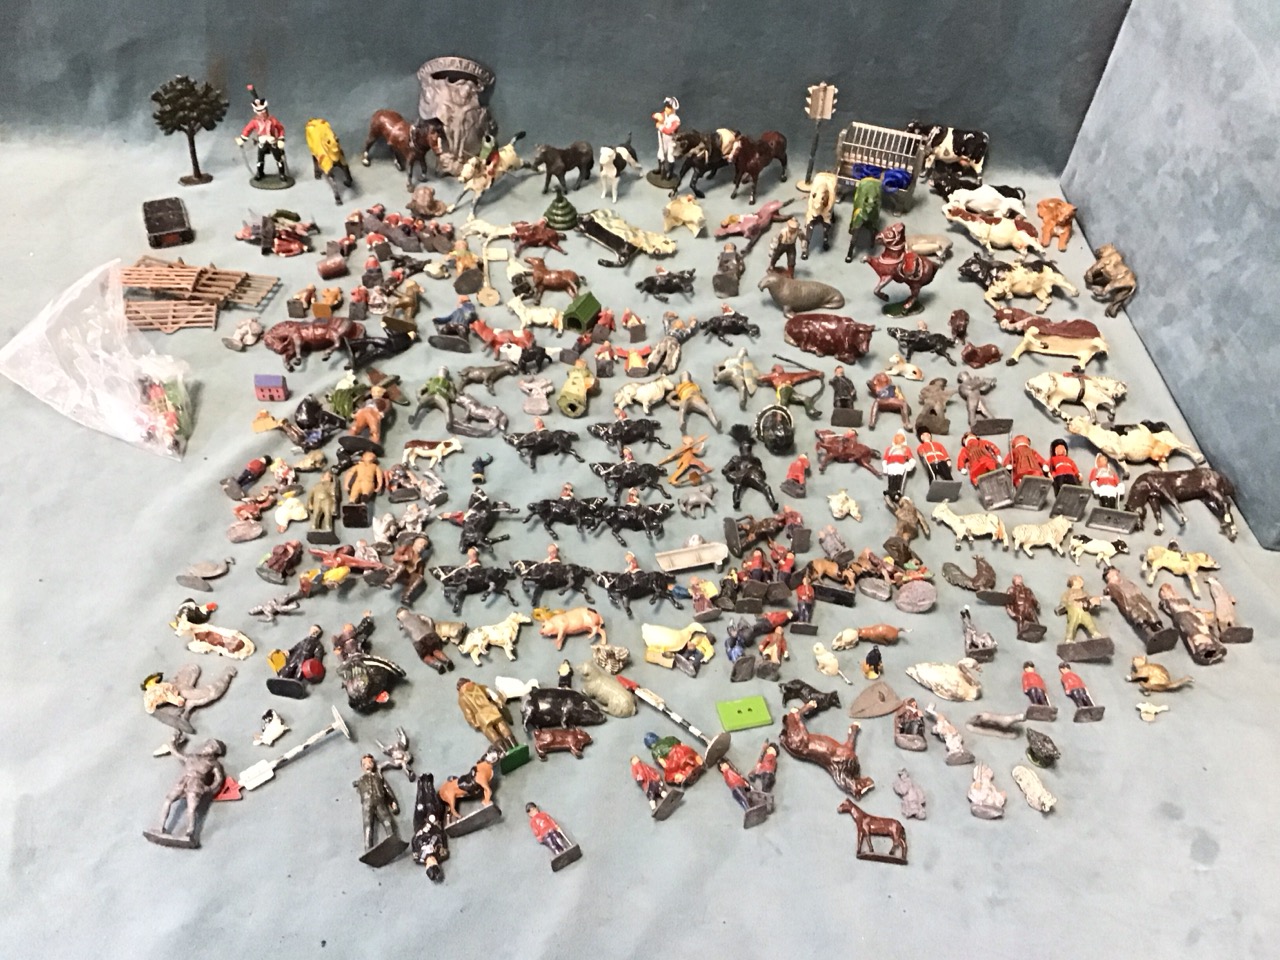 A collection of lead figures including soldiers, farm animals, knights, trees, street signs, etc. (A